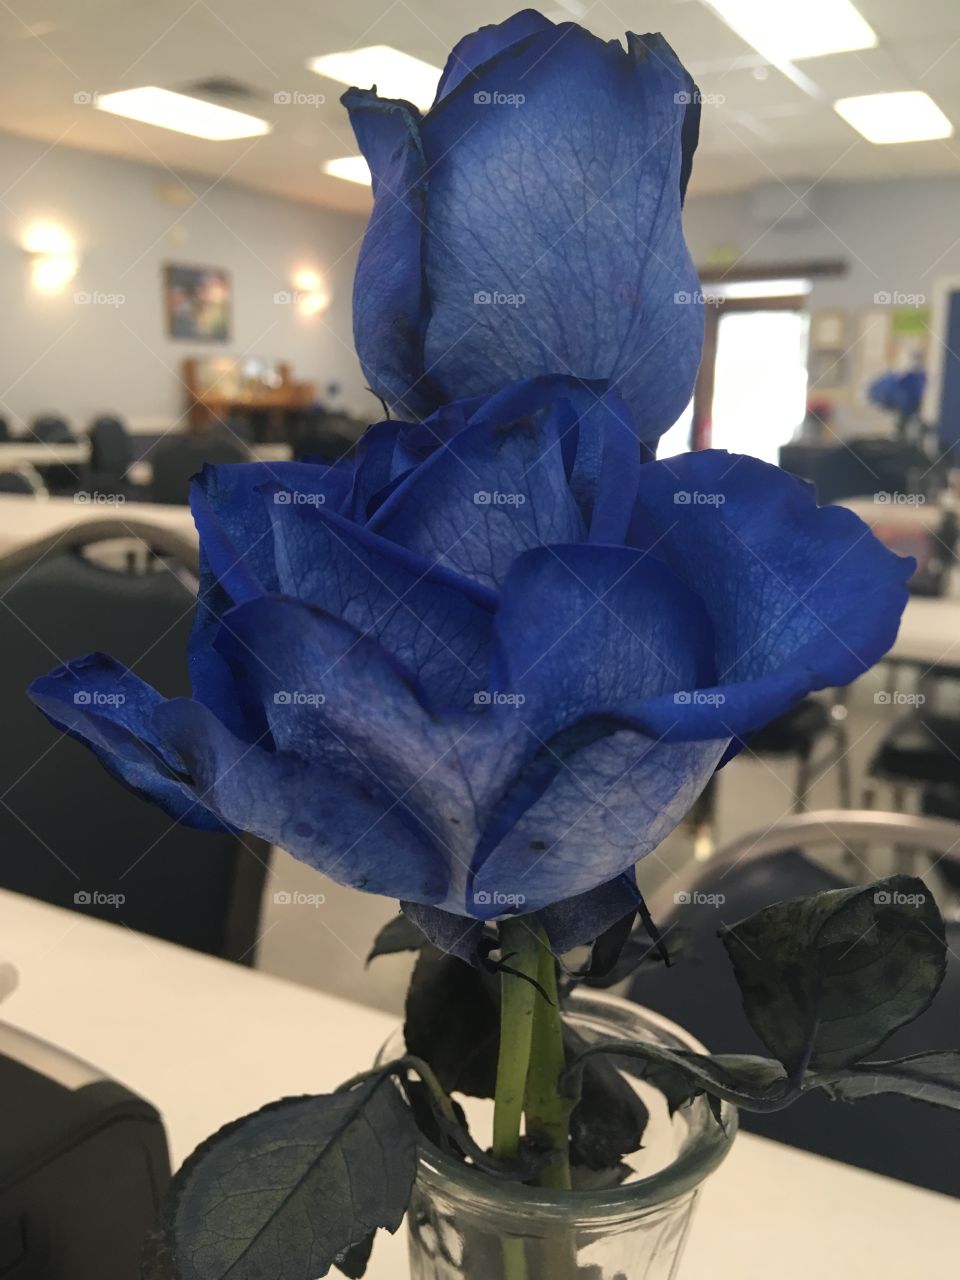 At the center waiting for lunch still enjoying these lovely blue roses makes me think of summer 